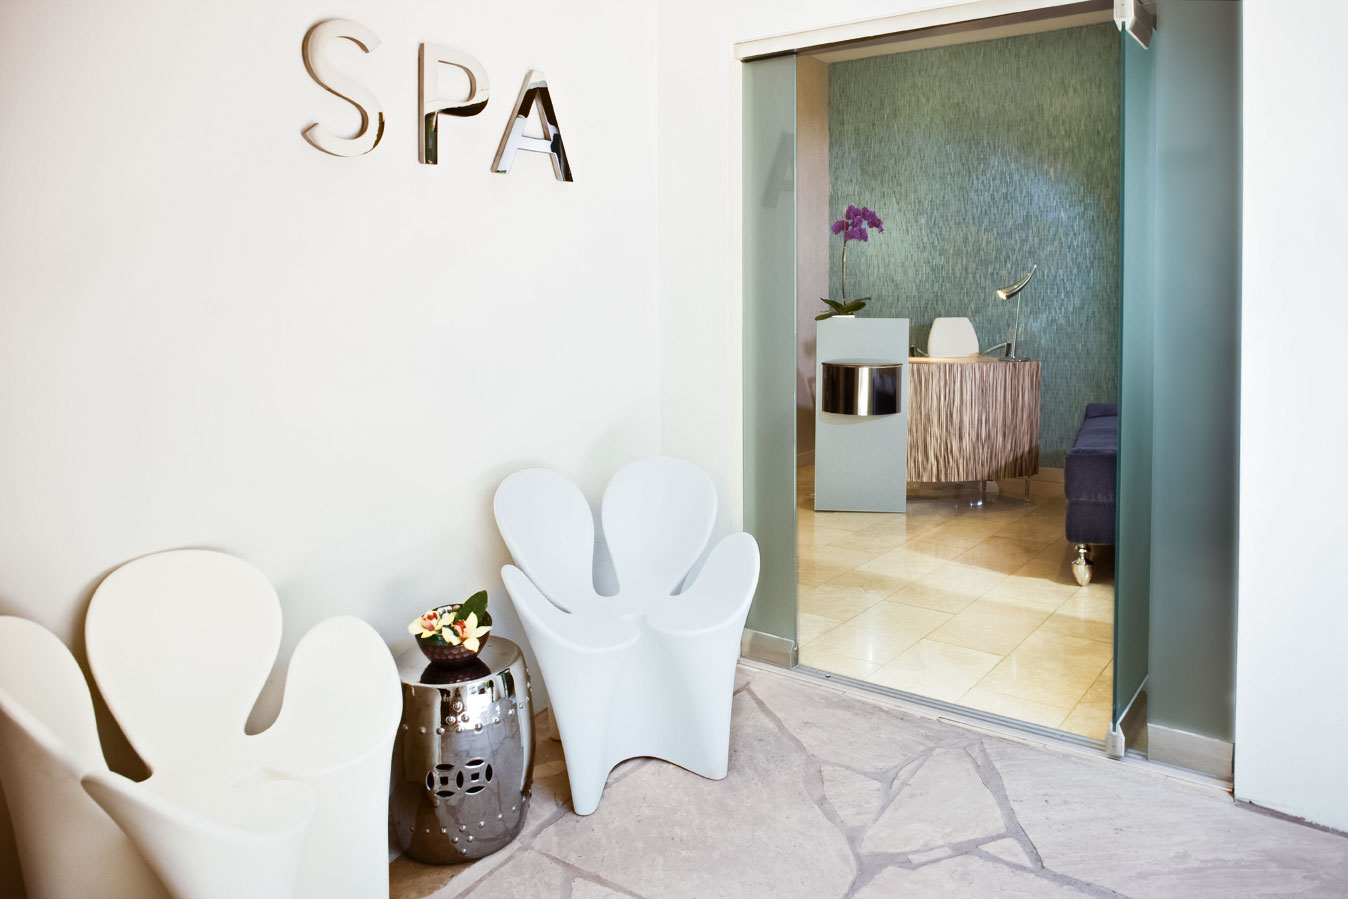 Spa at the Sunset Marquis